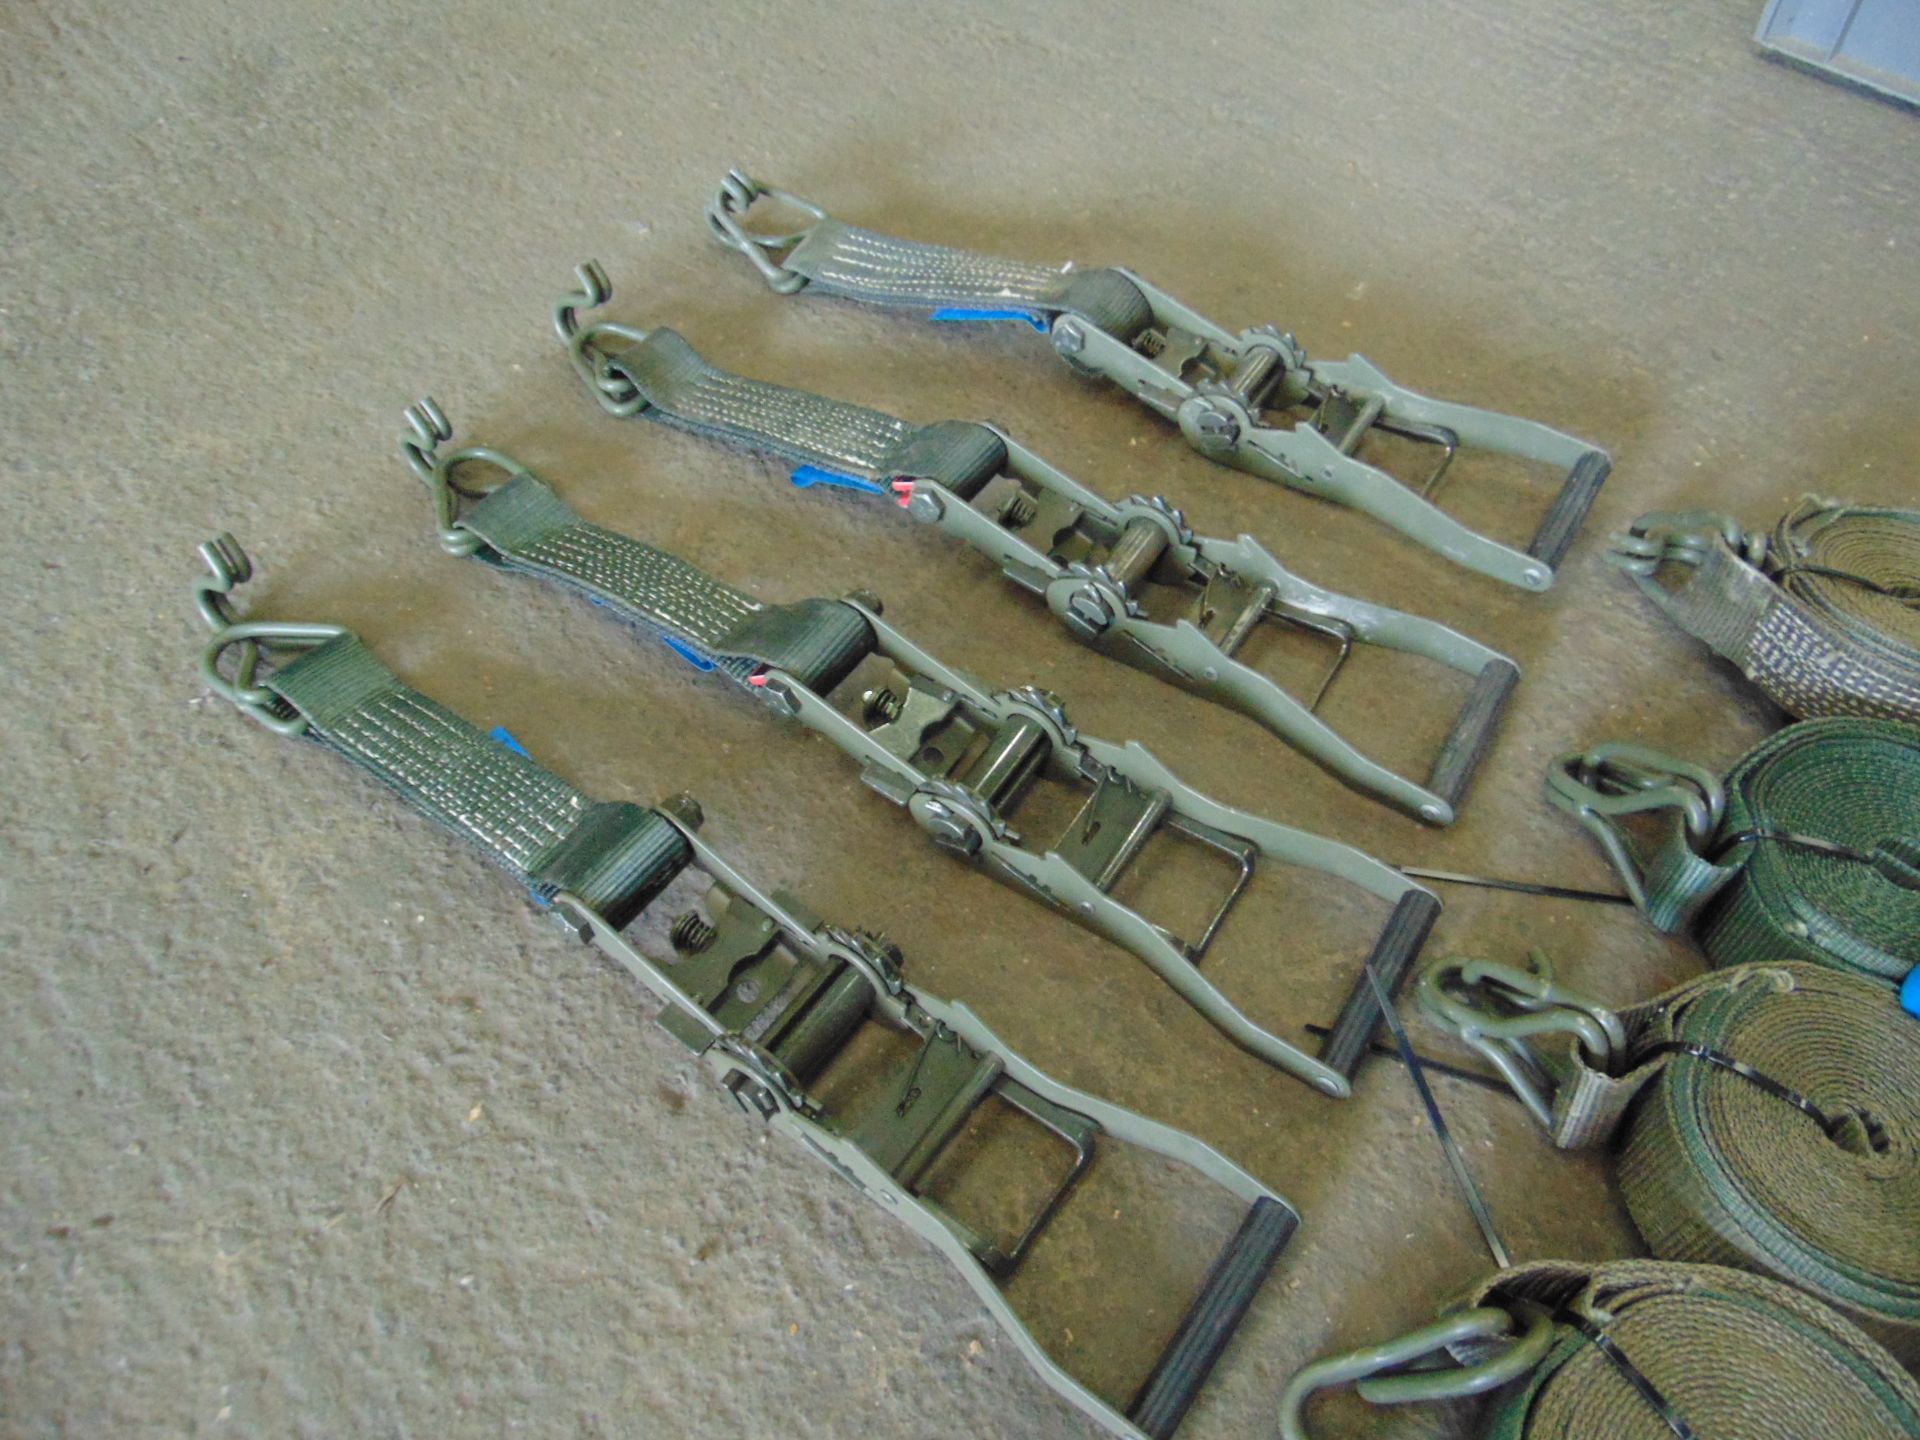 4 x Heavy Duty SpanSet Ratchets and Straps as shown - Image 2 of 5